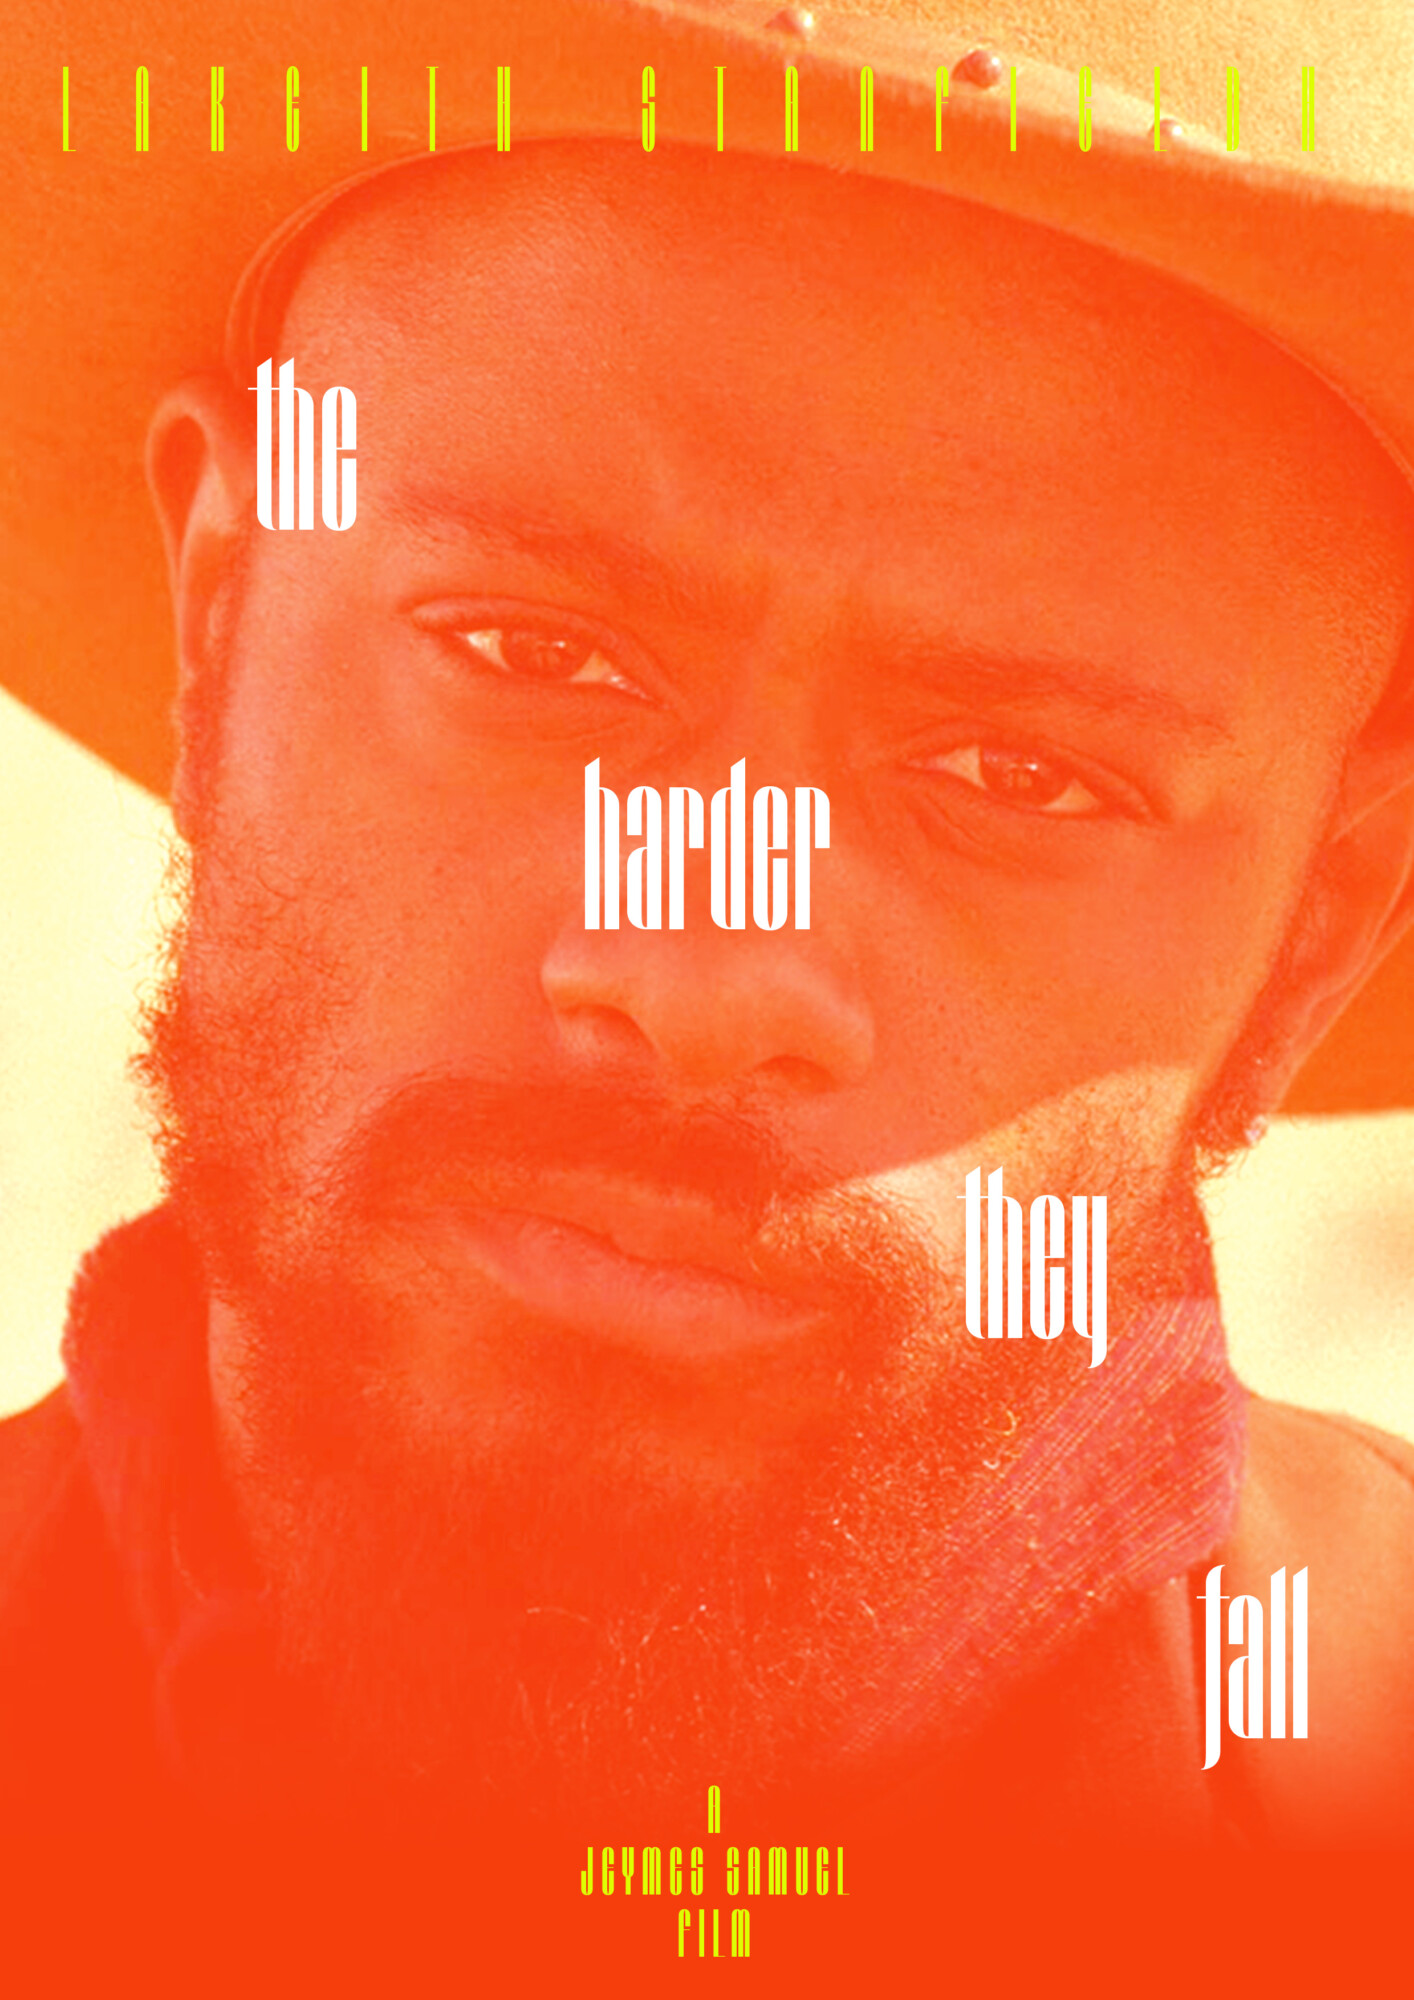 The Harder They Fall – LaKeith